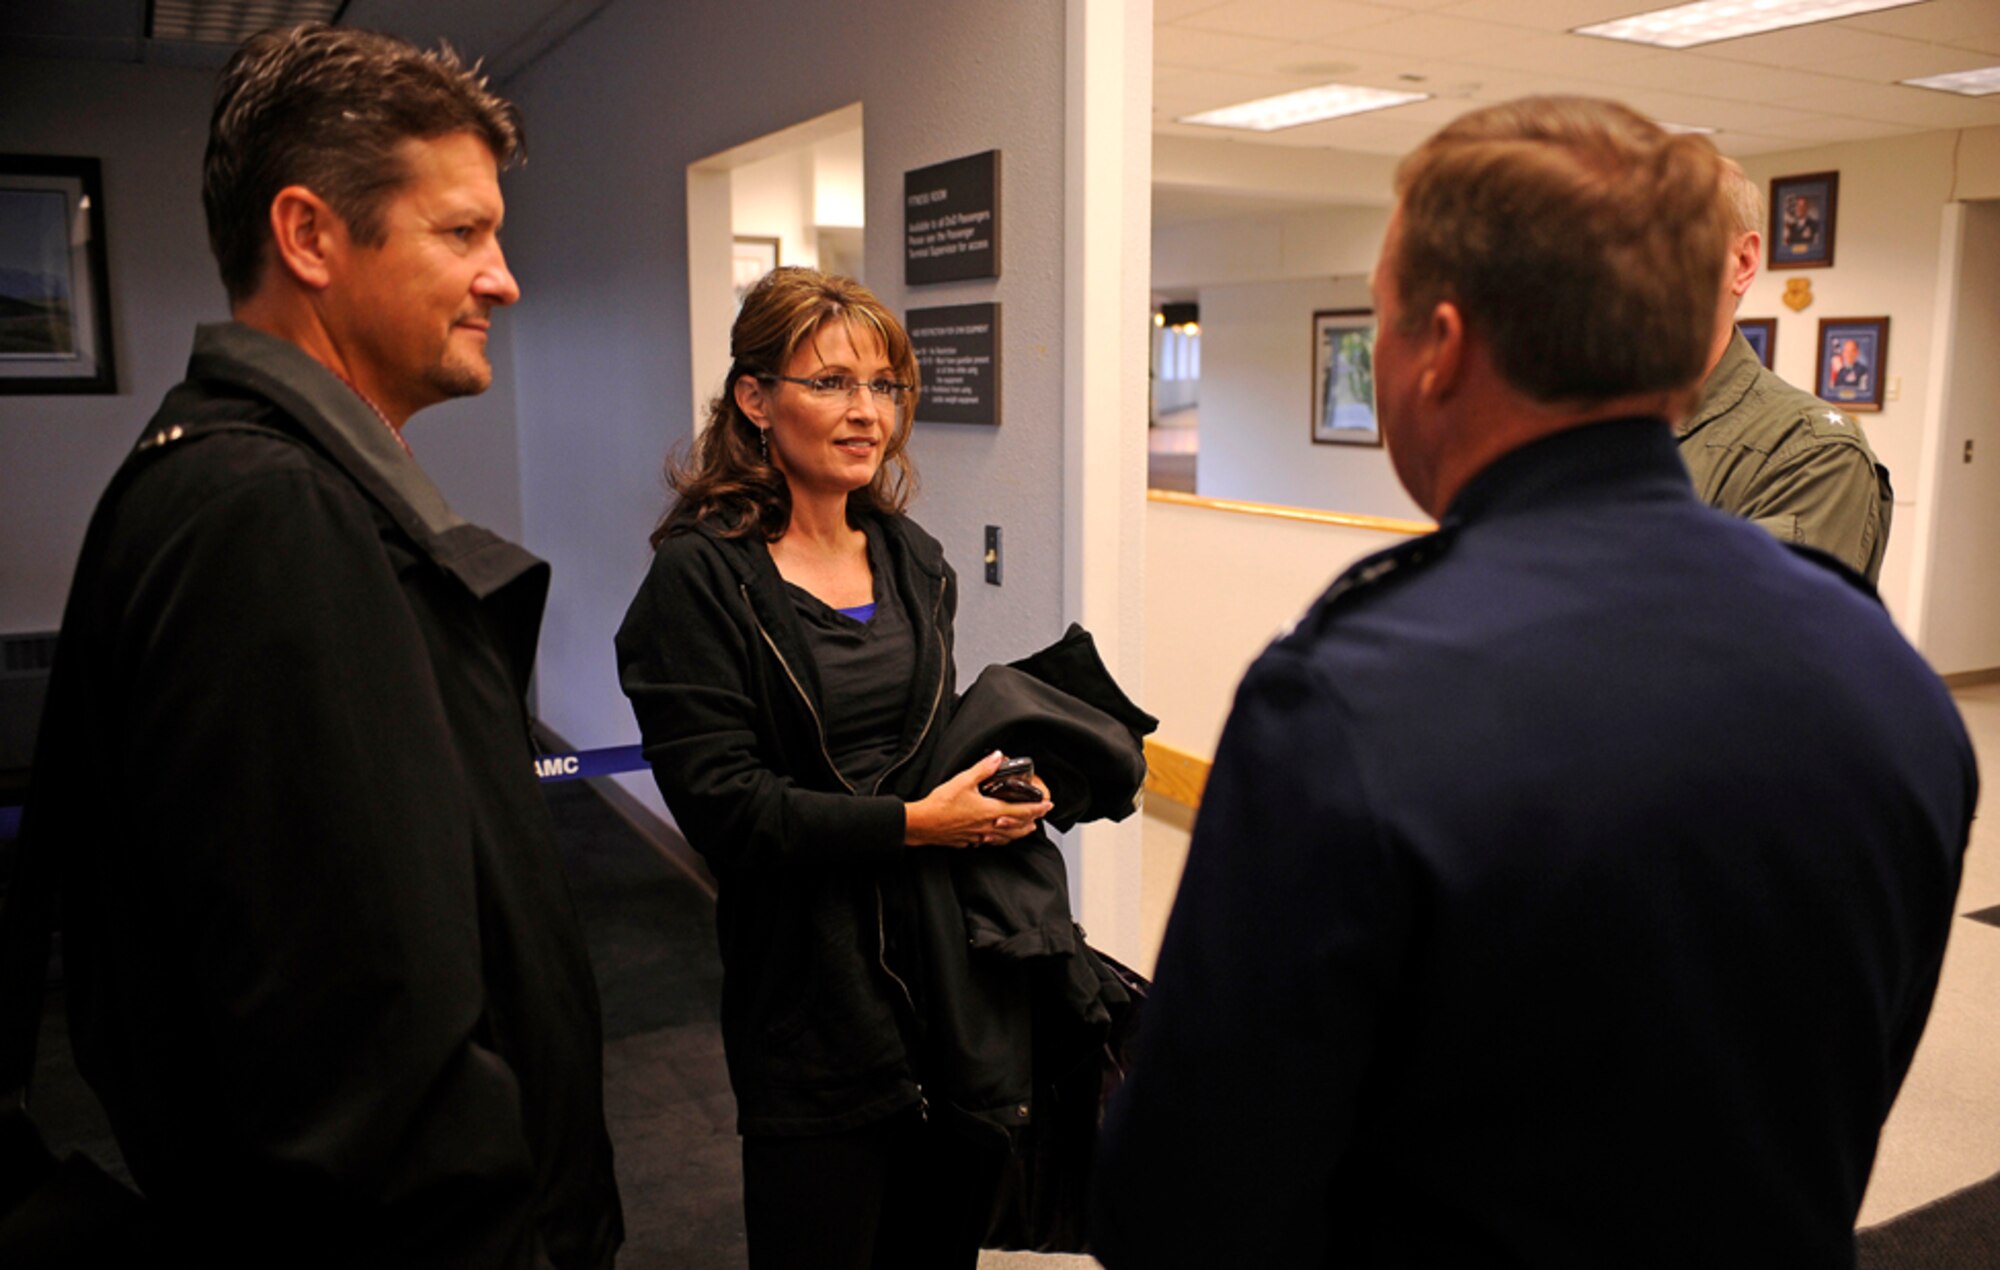 Alaska Governor Sarah Palin and her husband Todd meet with Lt. Gen. Dana T. Atkins, Alaskan Command Commander, 11th Air Force, and Rear Admiral Mark A. Vance, USS John C. Stennis (CVN 74) Strike Group Commander, before heading out to the USS John C. Stennis (CVN 74) during exercise Northern Edge 2009, Elmendorf AFB, Alaska, June 18, 2009.  Northern Edge 2009 is Alaska's largest military training exercise.  It prepares joint forces to respond to crises throughout the Asia-Pacific region.  (Released/U.S. Air Force photo by TSgt Dennis J. Henry Jr.)